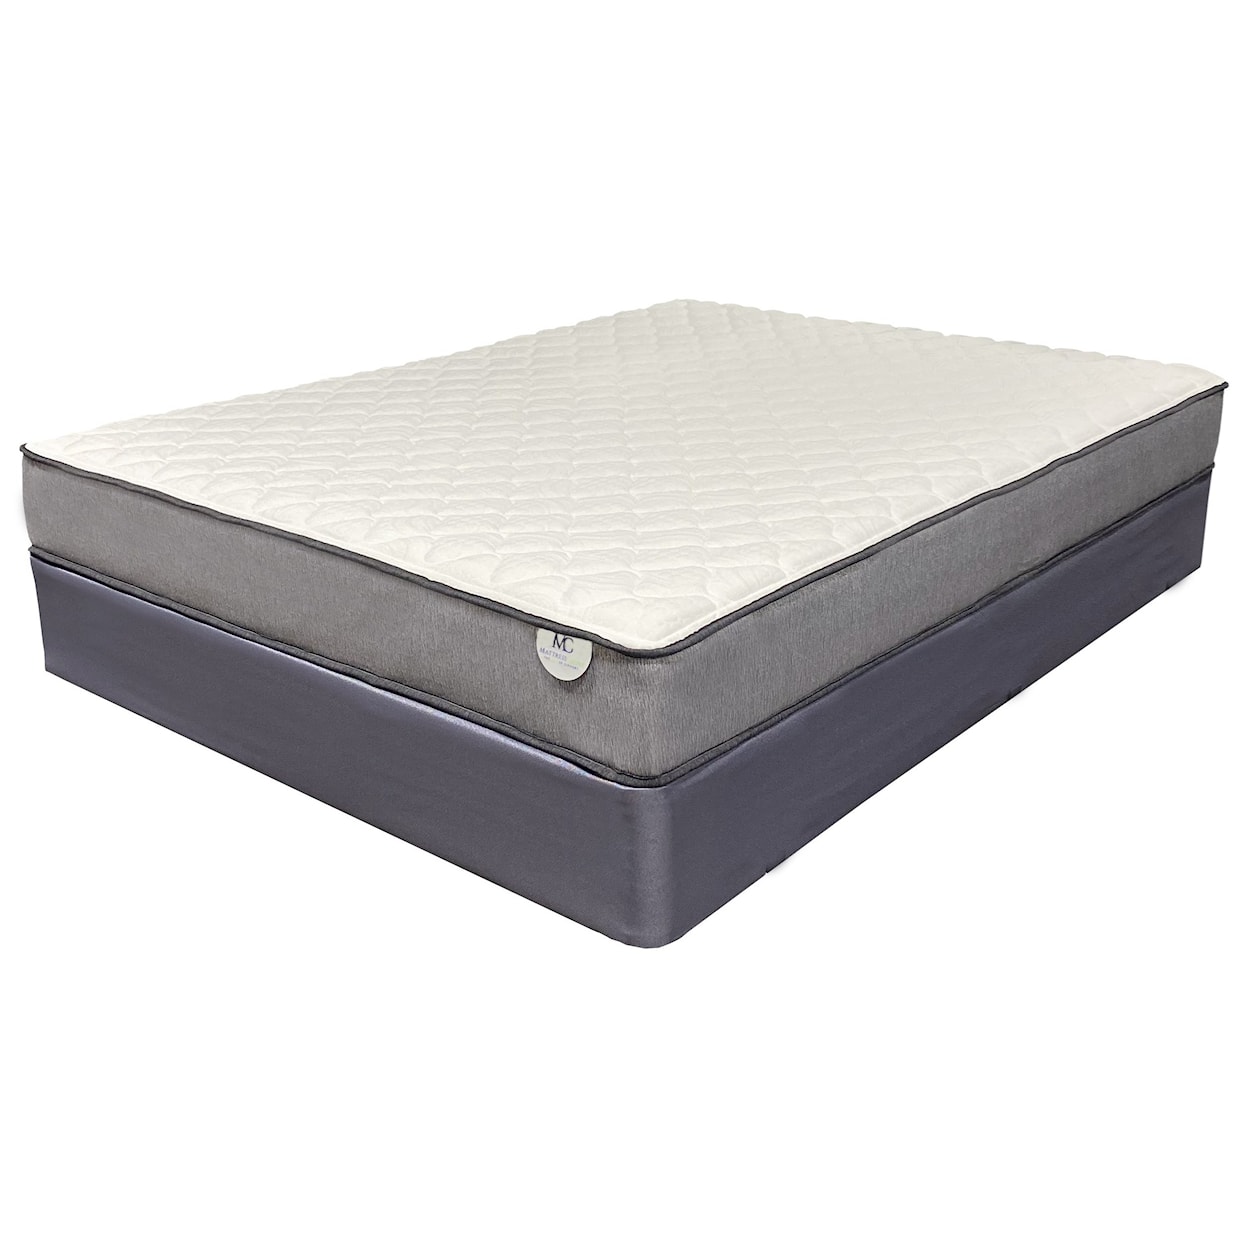 Spring Air MG Andes Firm Twin Firm Mattress